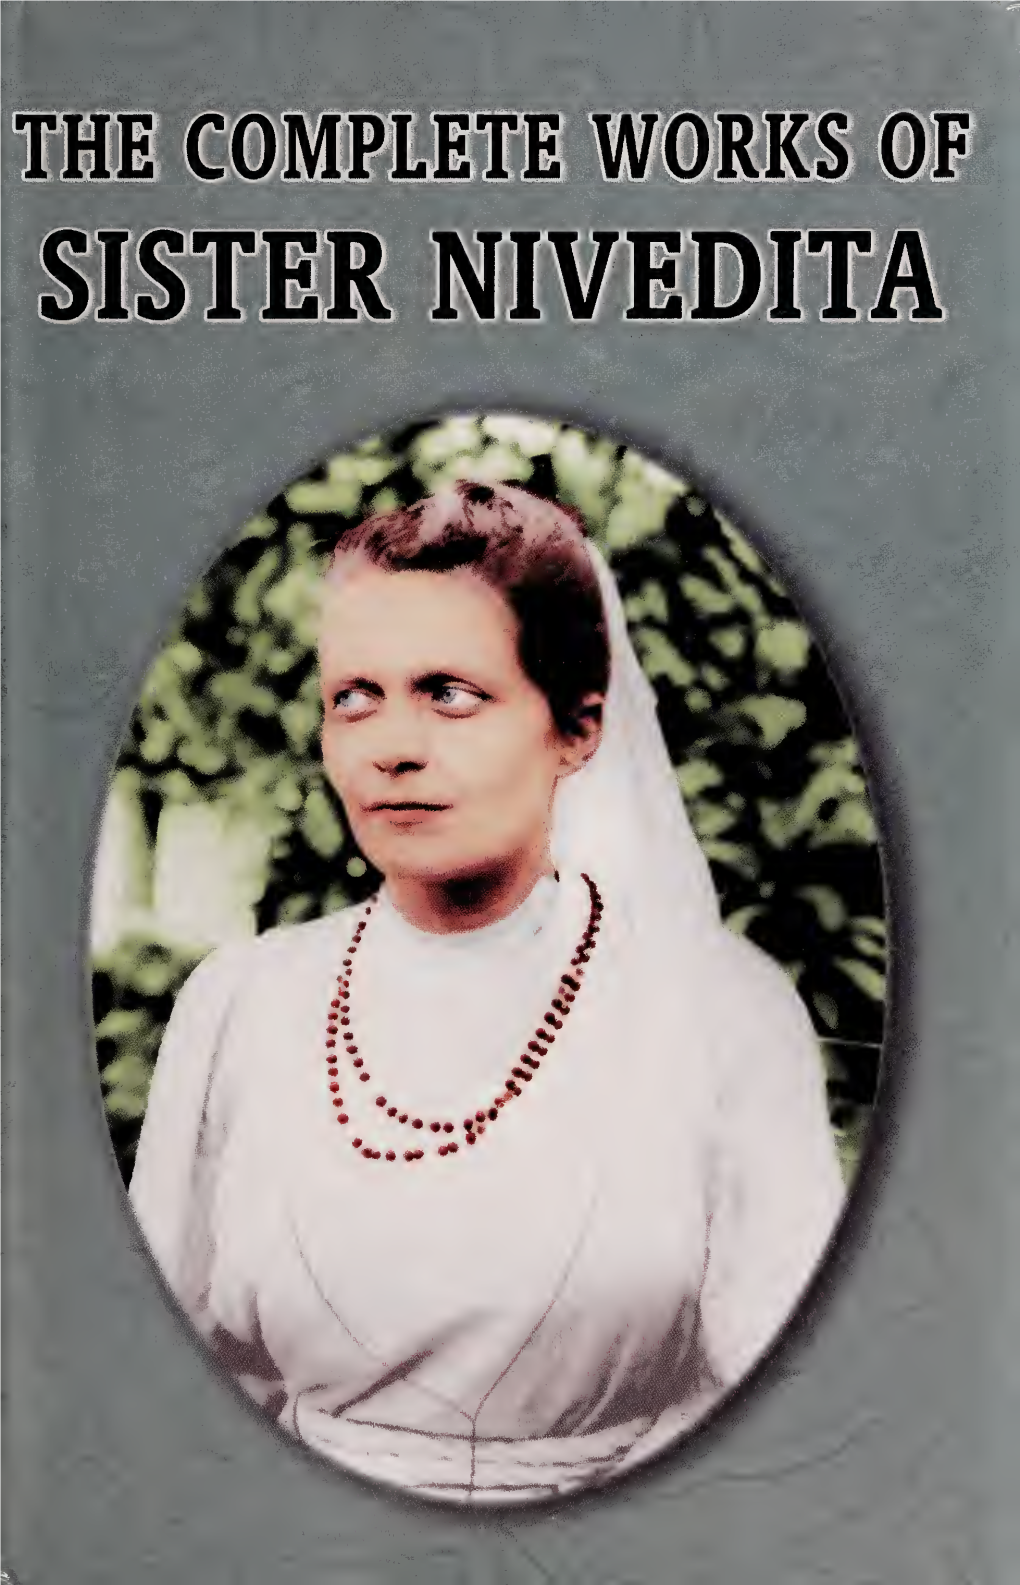 The Complete Works of Sister Nivedita Vol